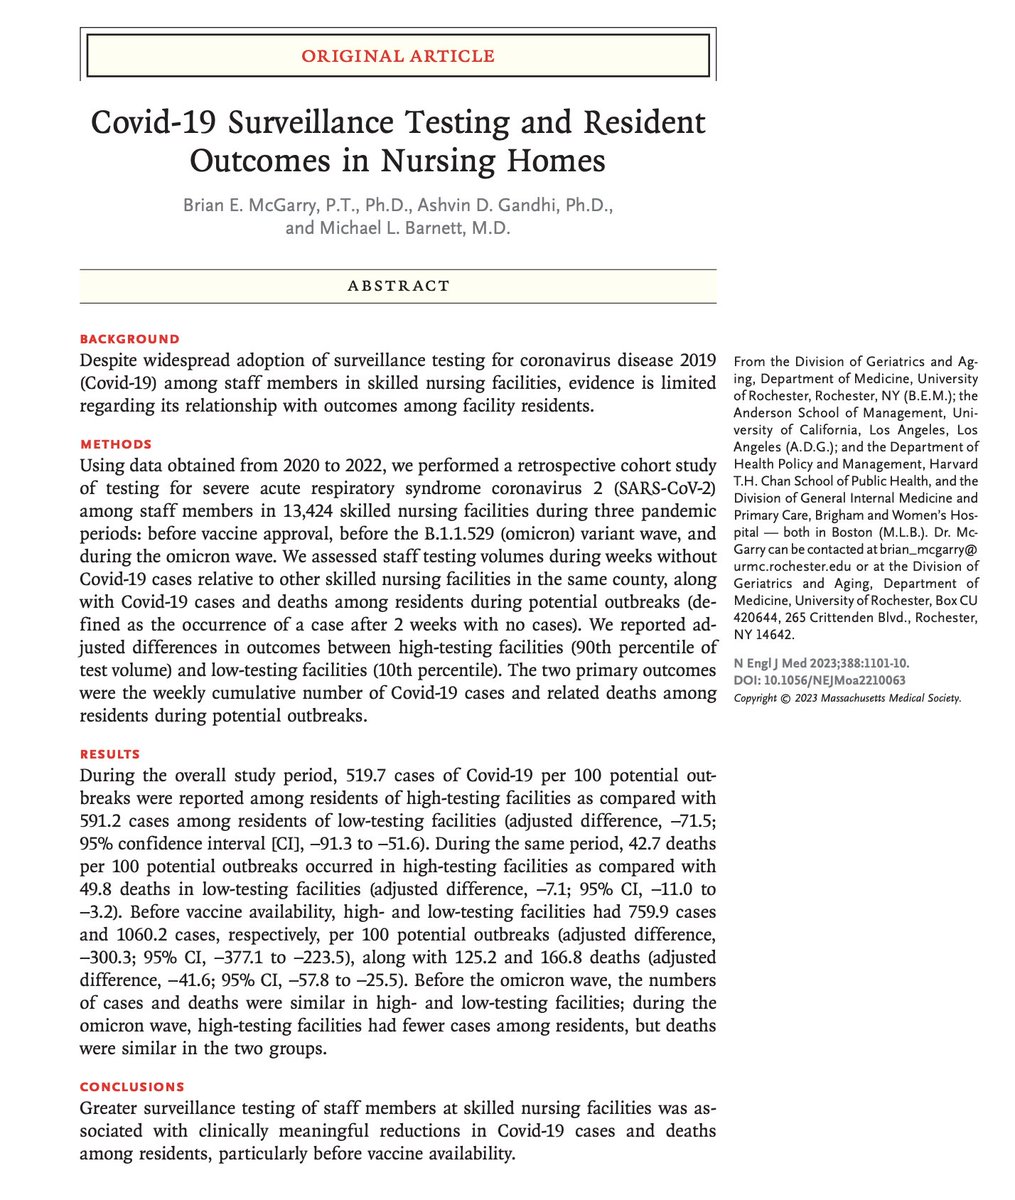 Excited to share a new paper today with @McGarryBE and @ashdgandhi published today in @NEJM TL;DR Nursing homes with higher use of COVID-19 tests for staff had 30% fewer resident cases and 26% fewer deaths than low testing facilities. That's a LOT. /1 nejm.org/doi/full/10.10…